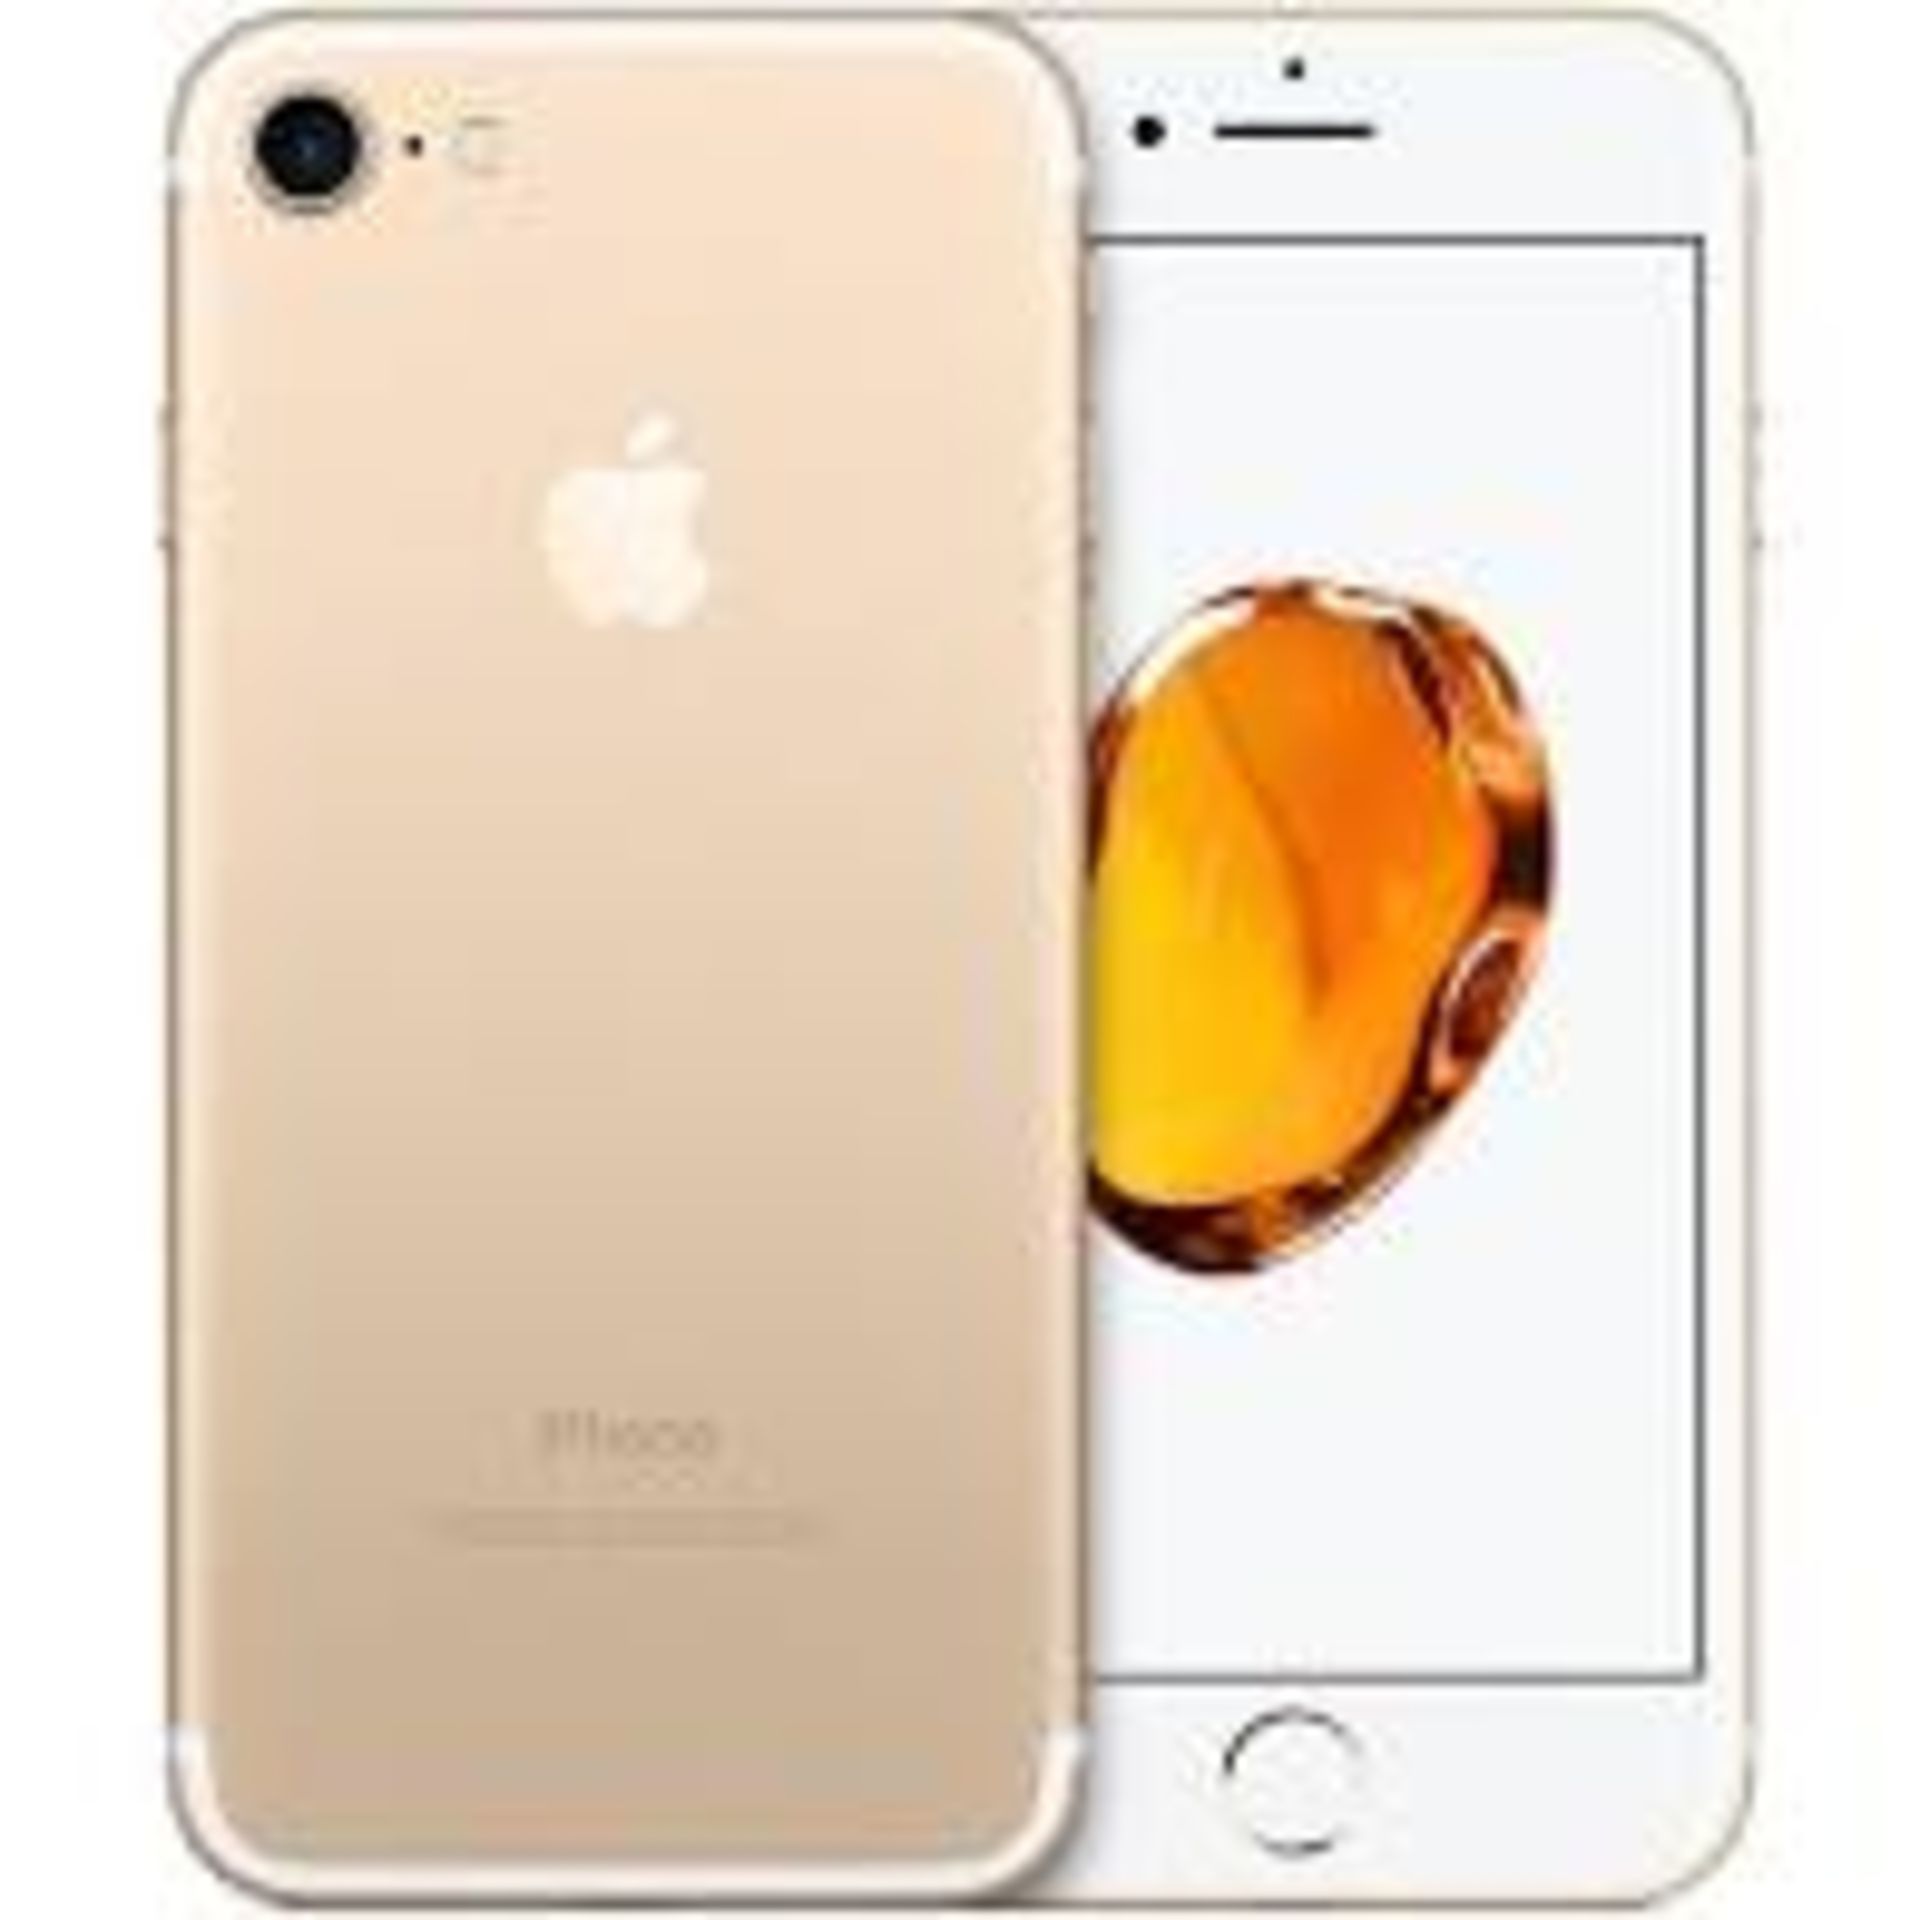 Apple iPhone 7 32GB Gold RRP £320 - Grade A - Perfect Working Condition - (Fully refurbished and